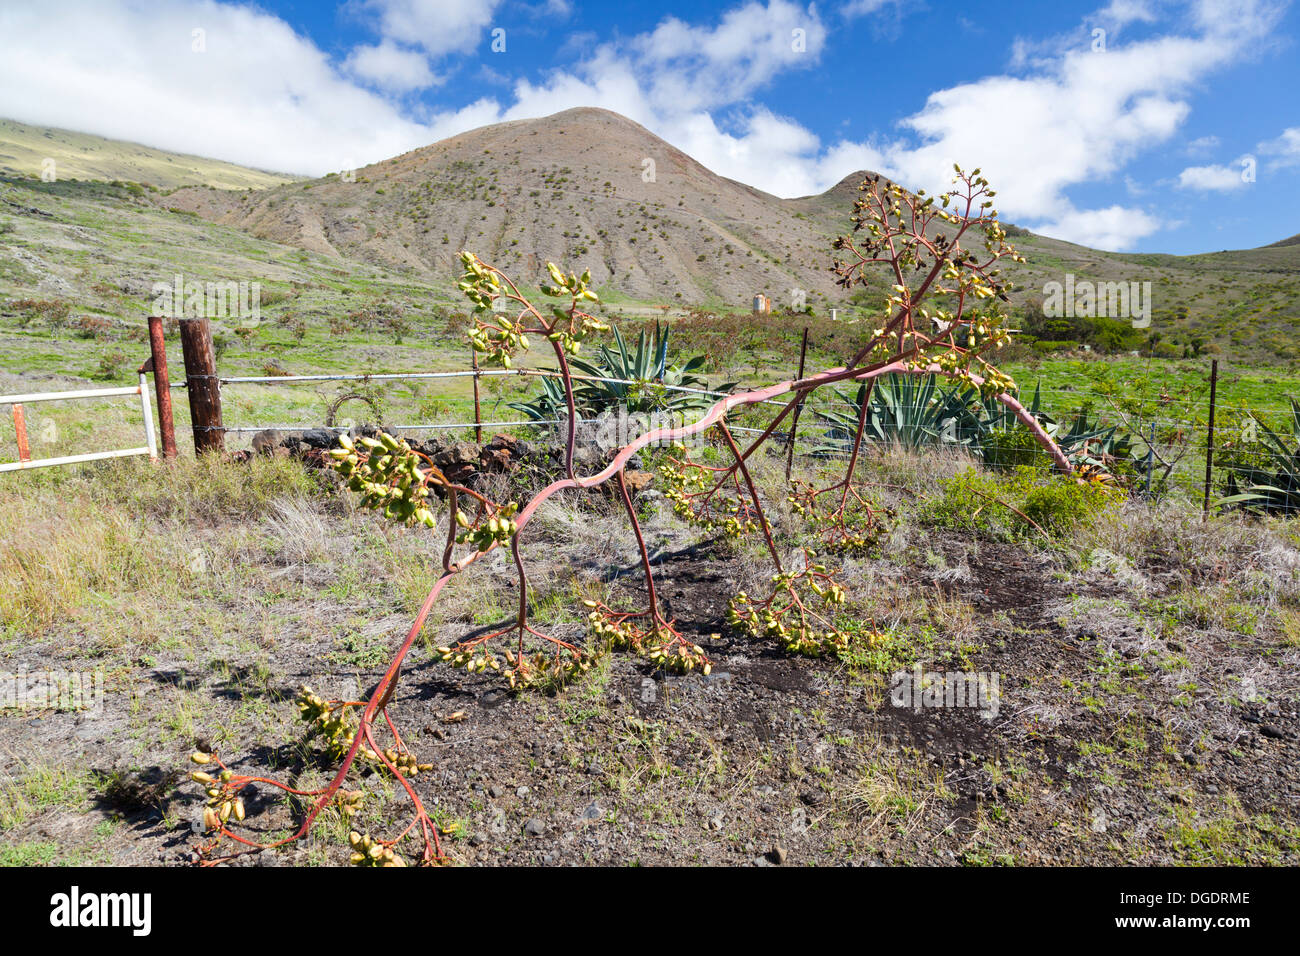 Southern Maui landscape with hills on the flank of Haleakala, Hawaii, an Aloe Vera plant in the foreground. Stock Photo